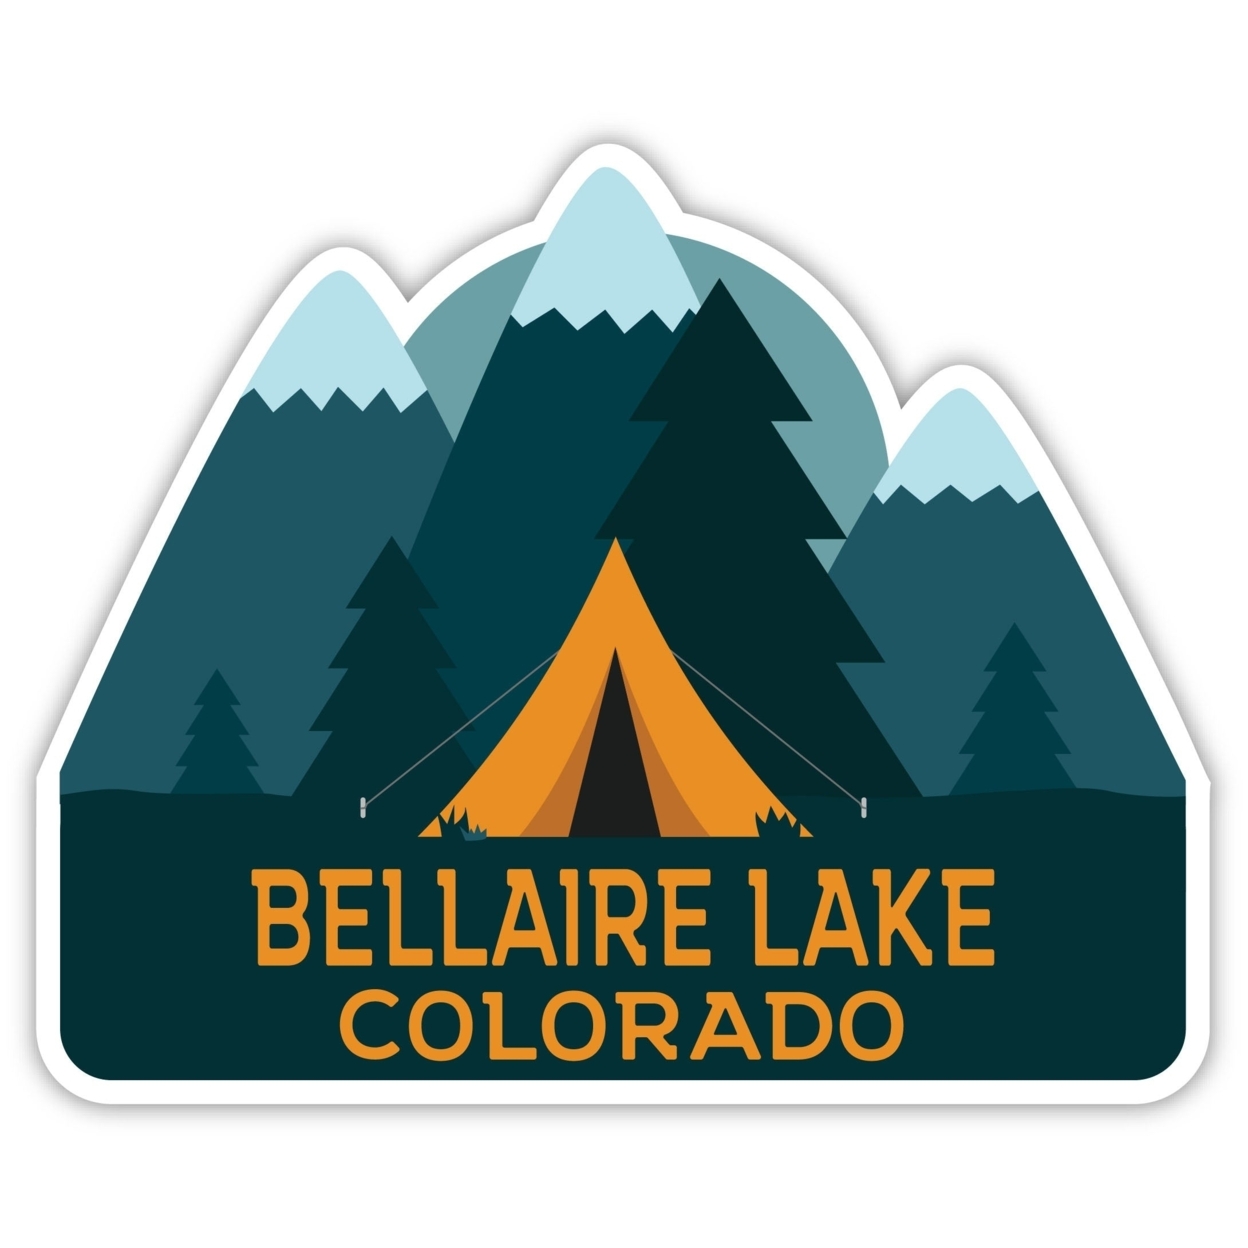 Bellaire Lake Colorado Souvenir Decorative Stickers (Choose Theme And Size) - 4-Pack, 10-Inch, Tent